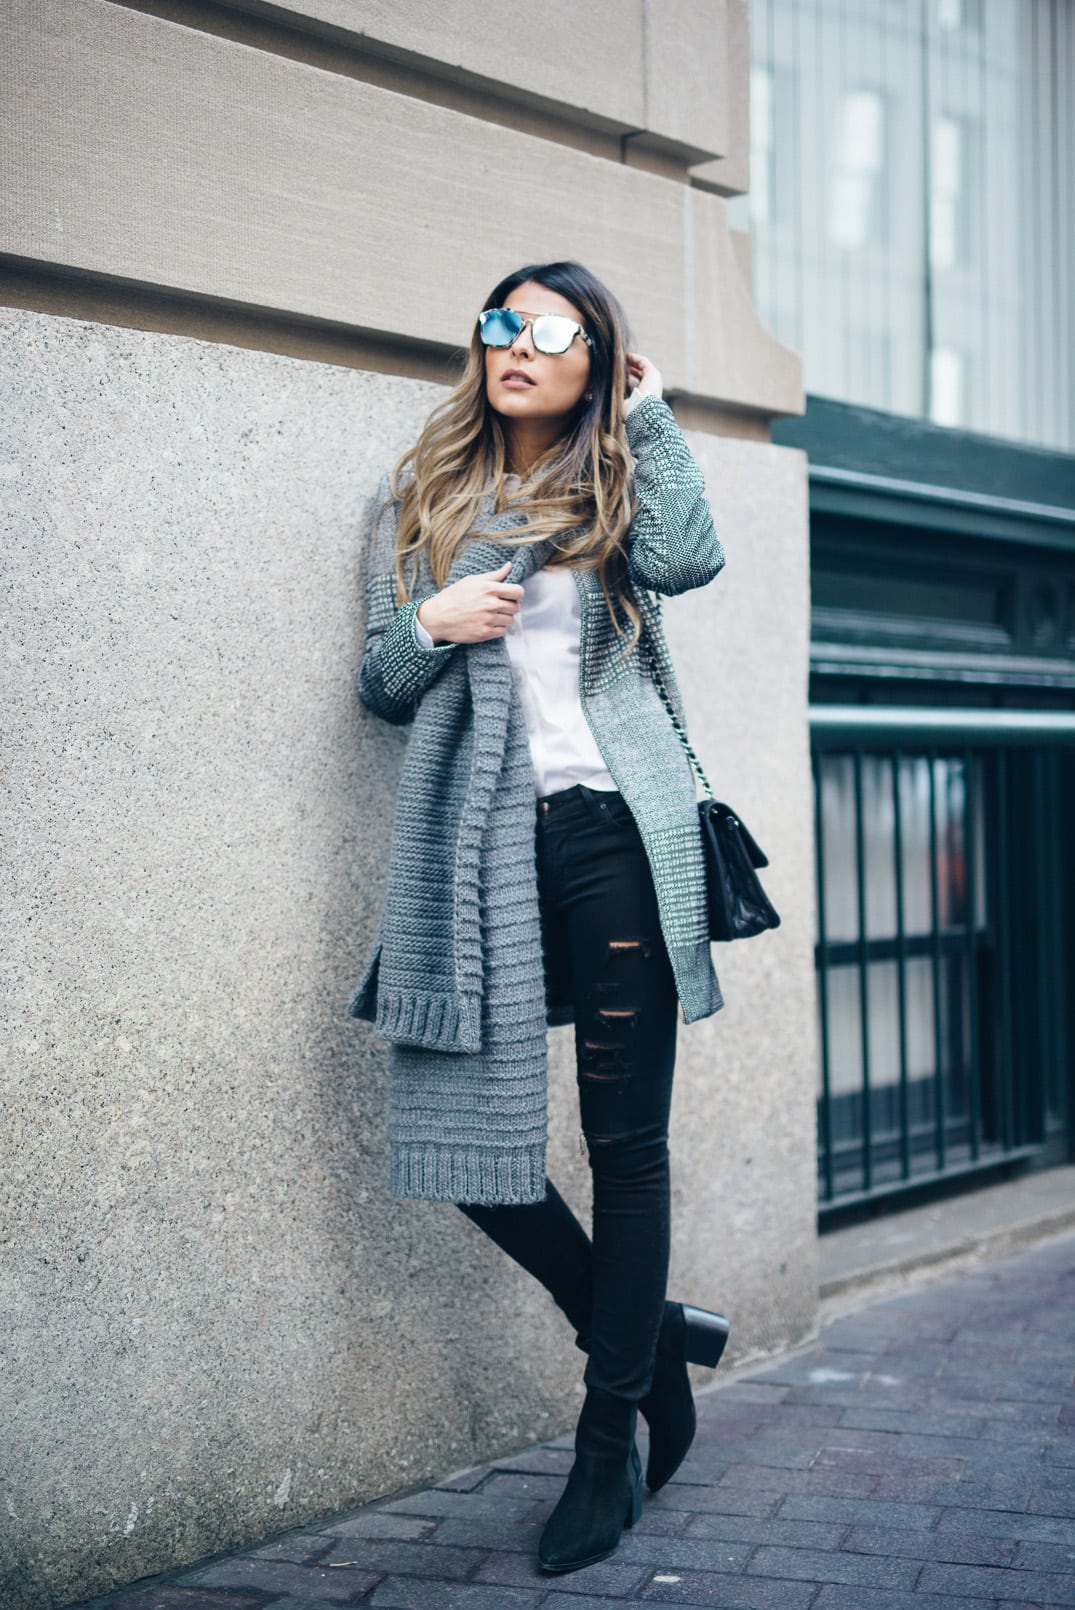 Pam Hetlinger wearing a Textured-weave Jacket, dstld ripped jeans, aldo low heel booties, dior abstract sunglasses, gray scarf, and chanel french riviera flap.